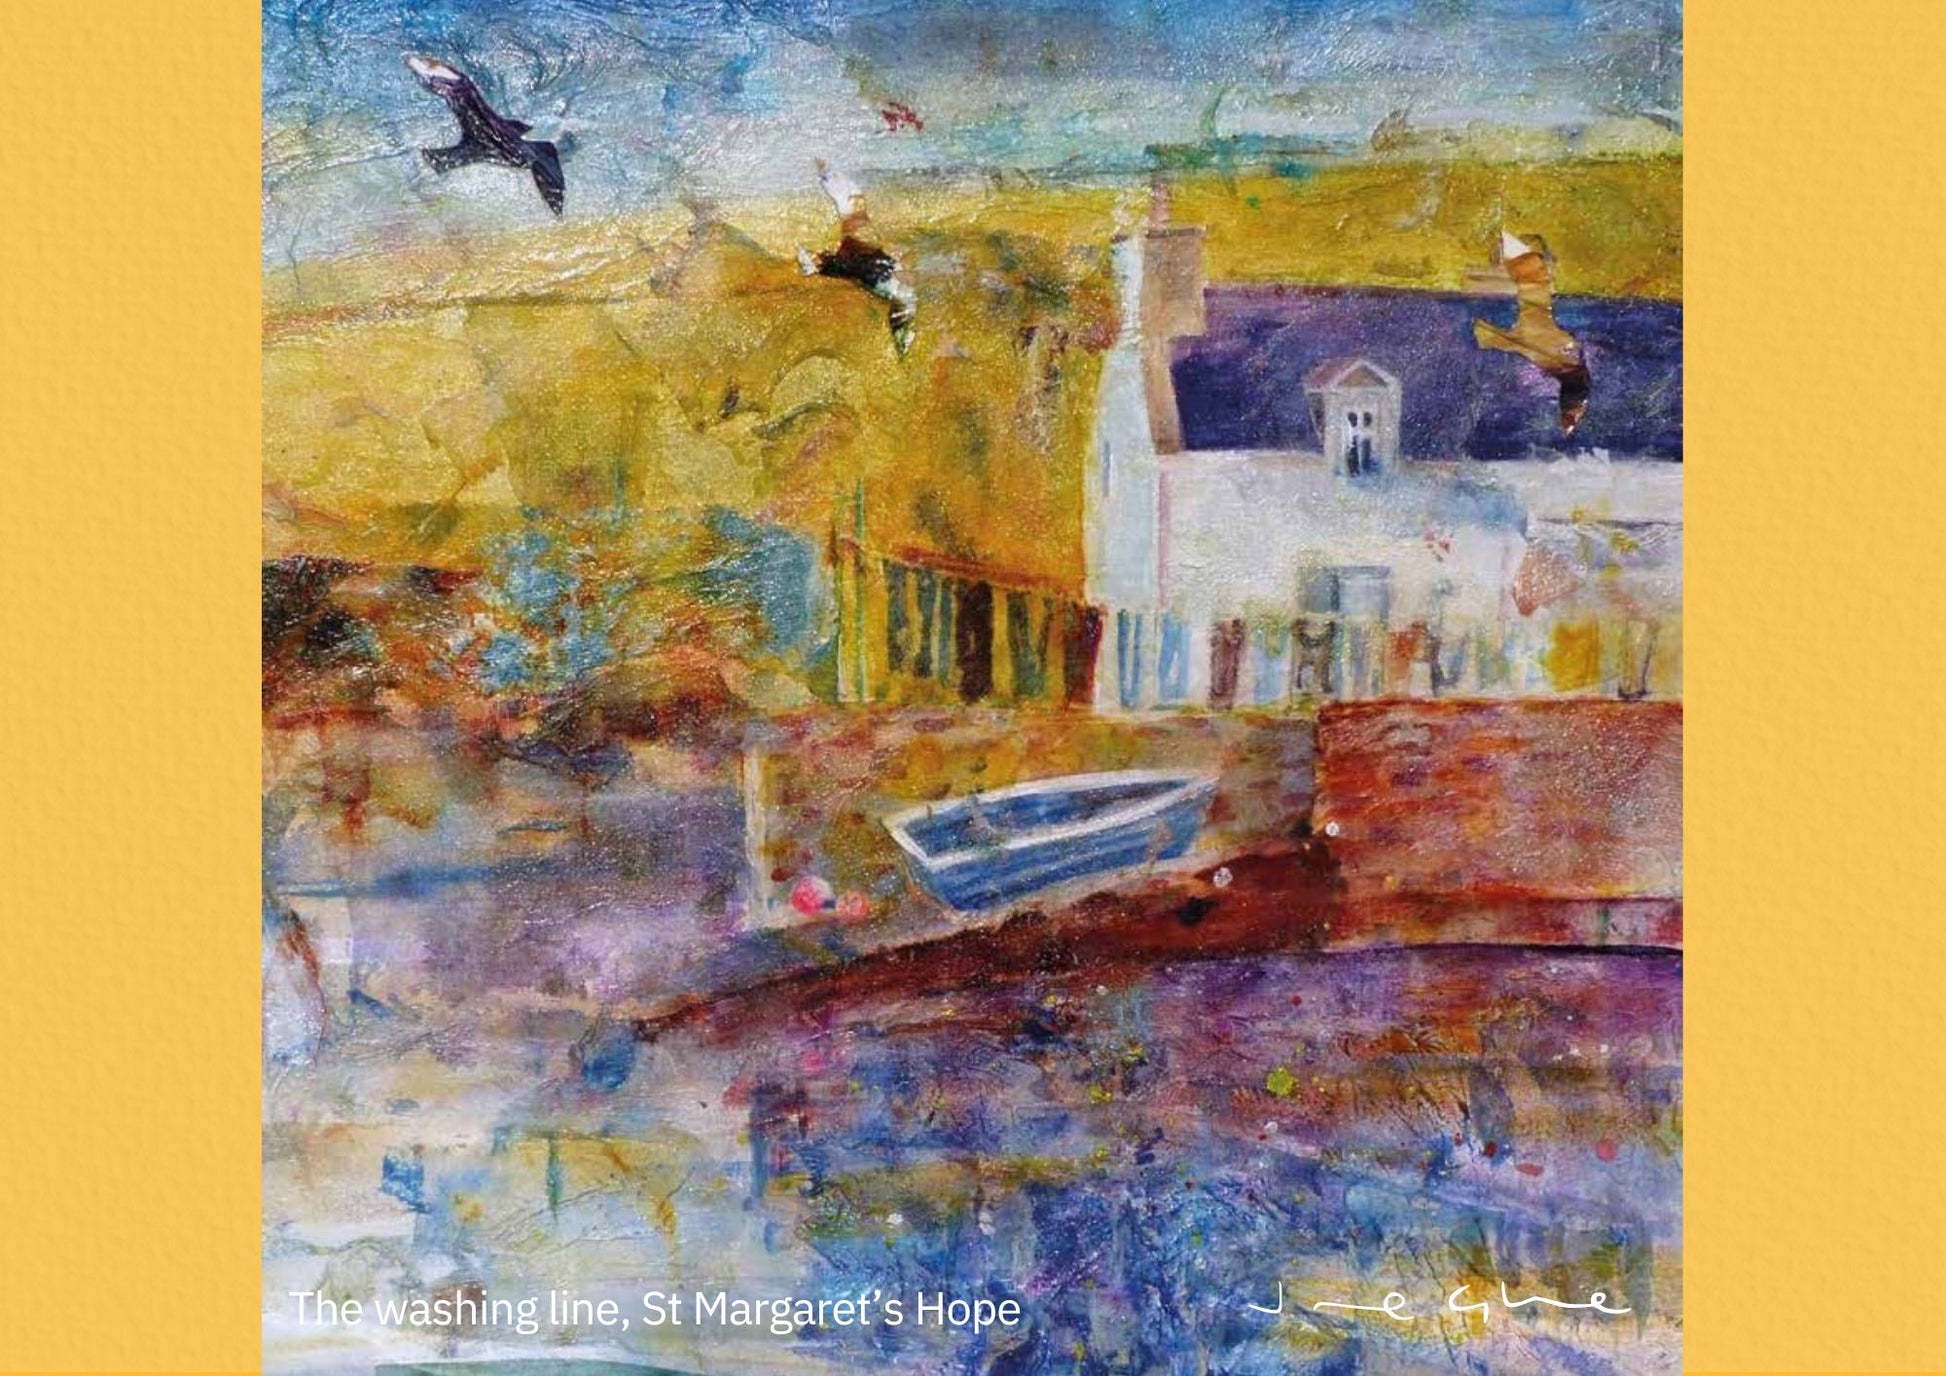 Orkney calendar 2025 September page with mixed media painting of St Margarets Hope village by the sea with washing line and fishing boat by Orkney artist Jane Glue